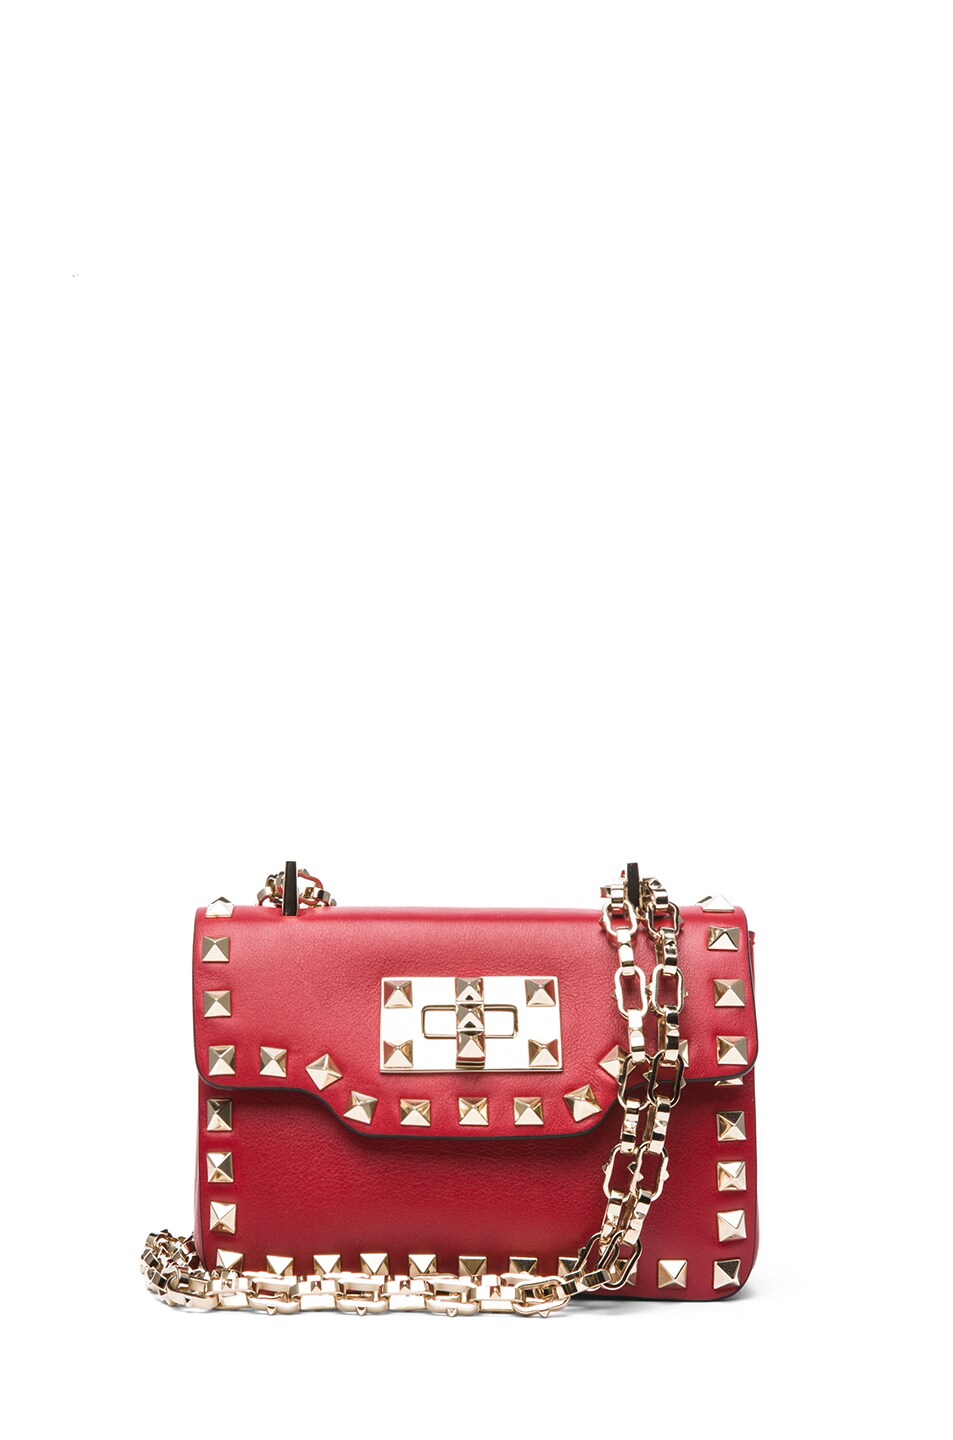 Valentino Small Rockstud Chain Flap Bag in Red | FWRD